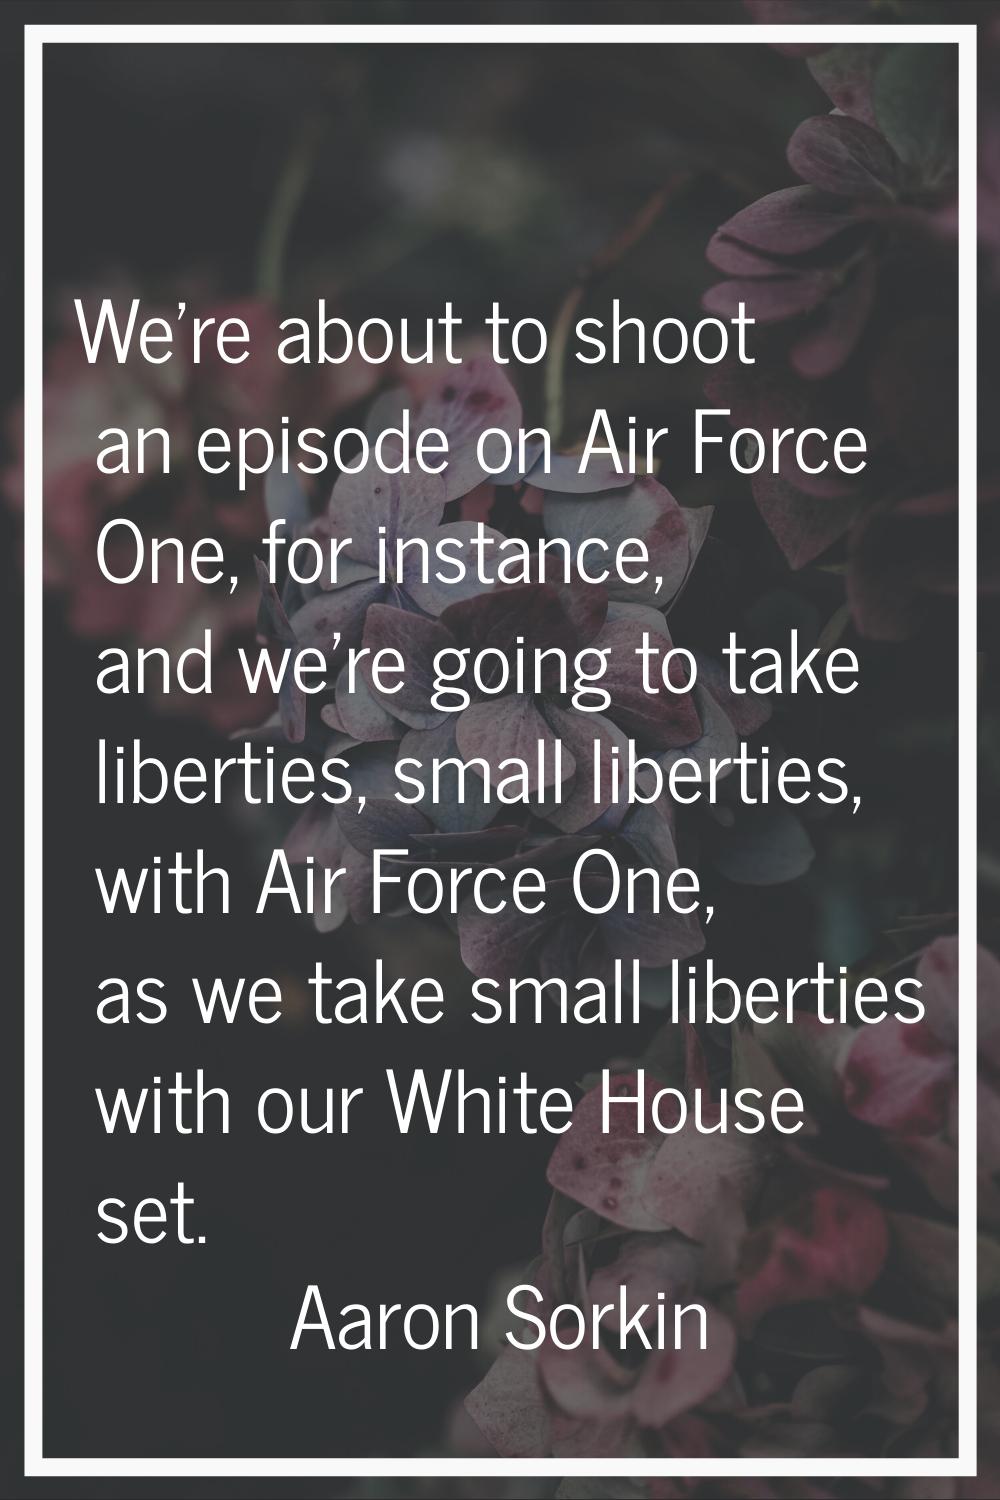 We're about to shoot an episode on Air Force One, for instance, and we're going to take liberties, 